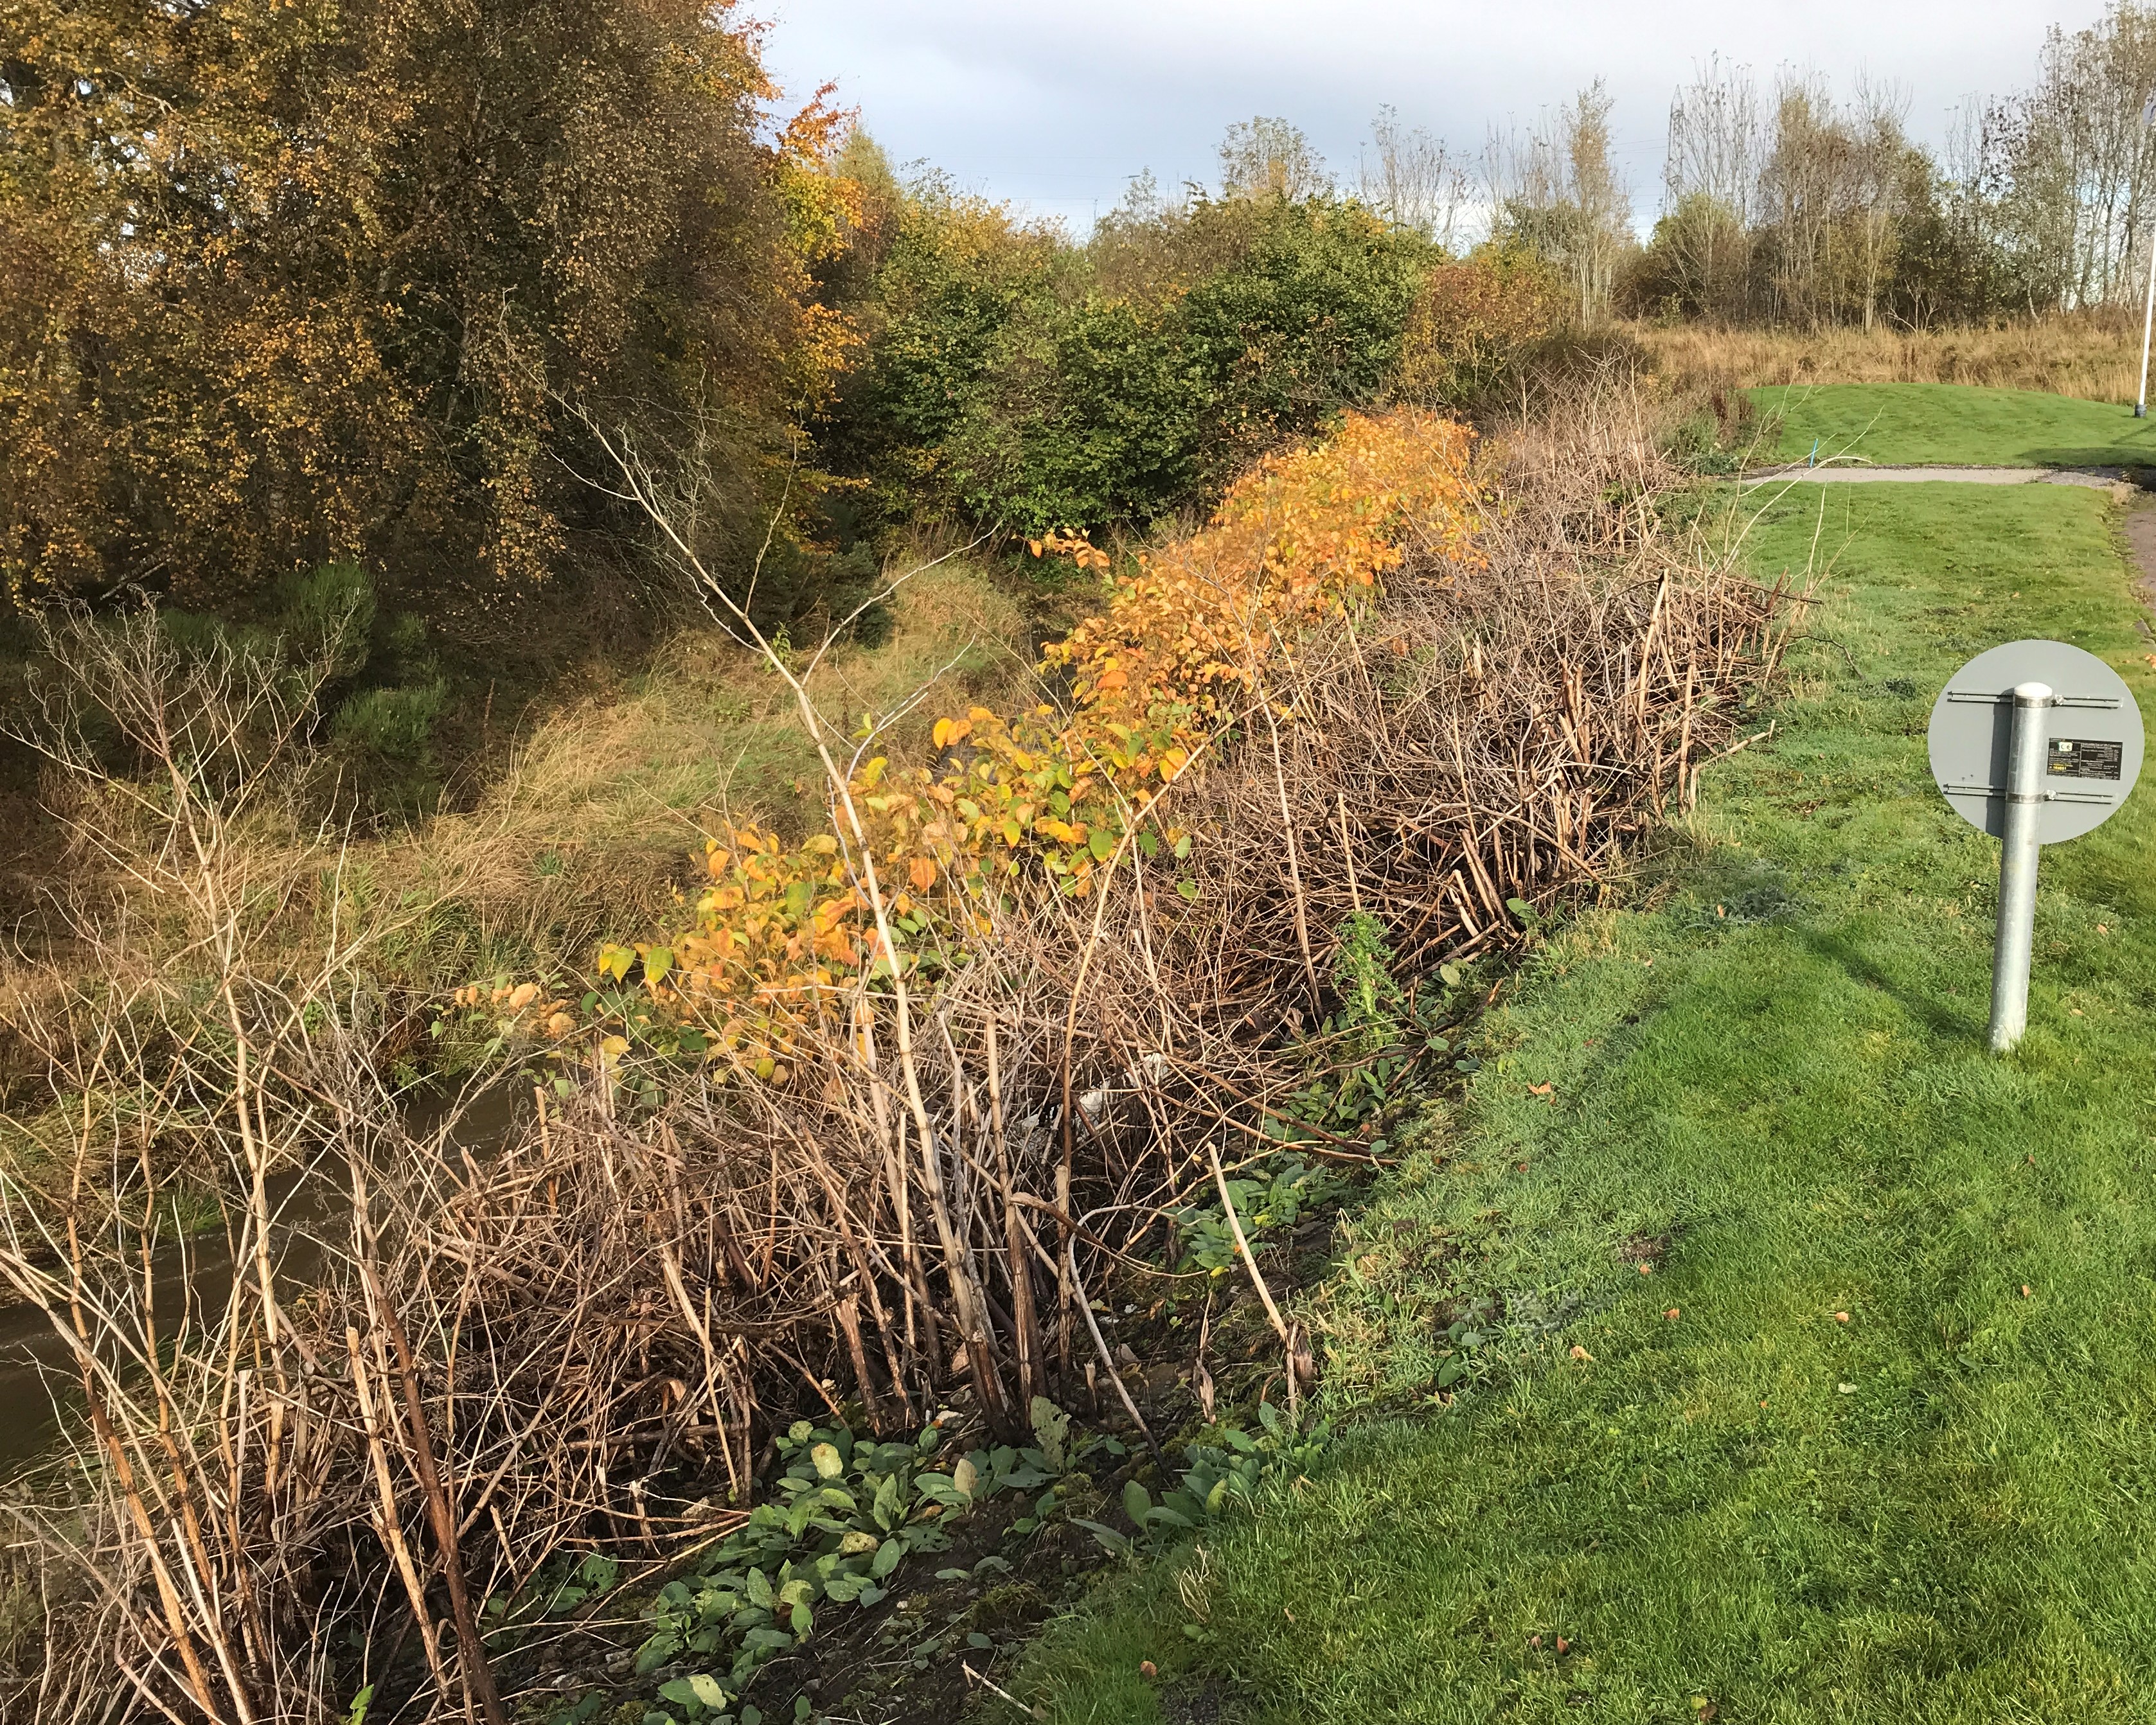 Japanese knotweed on the Sheriff burn in 2020 - after treatment